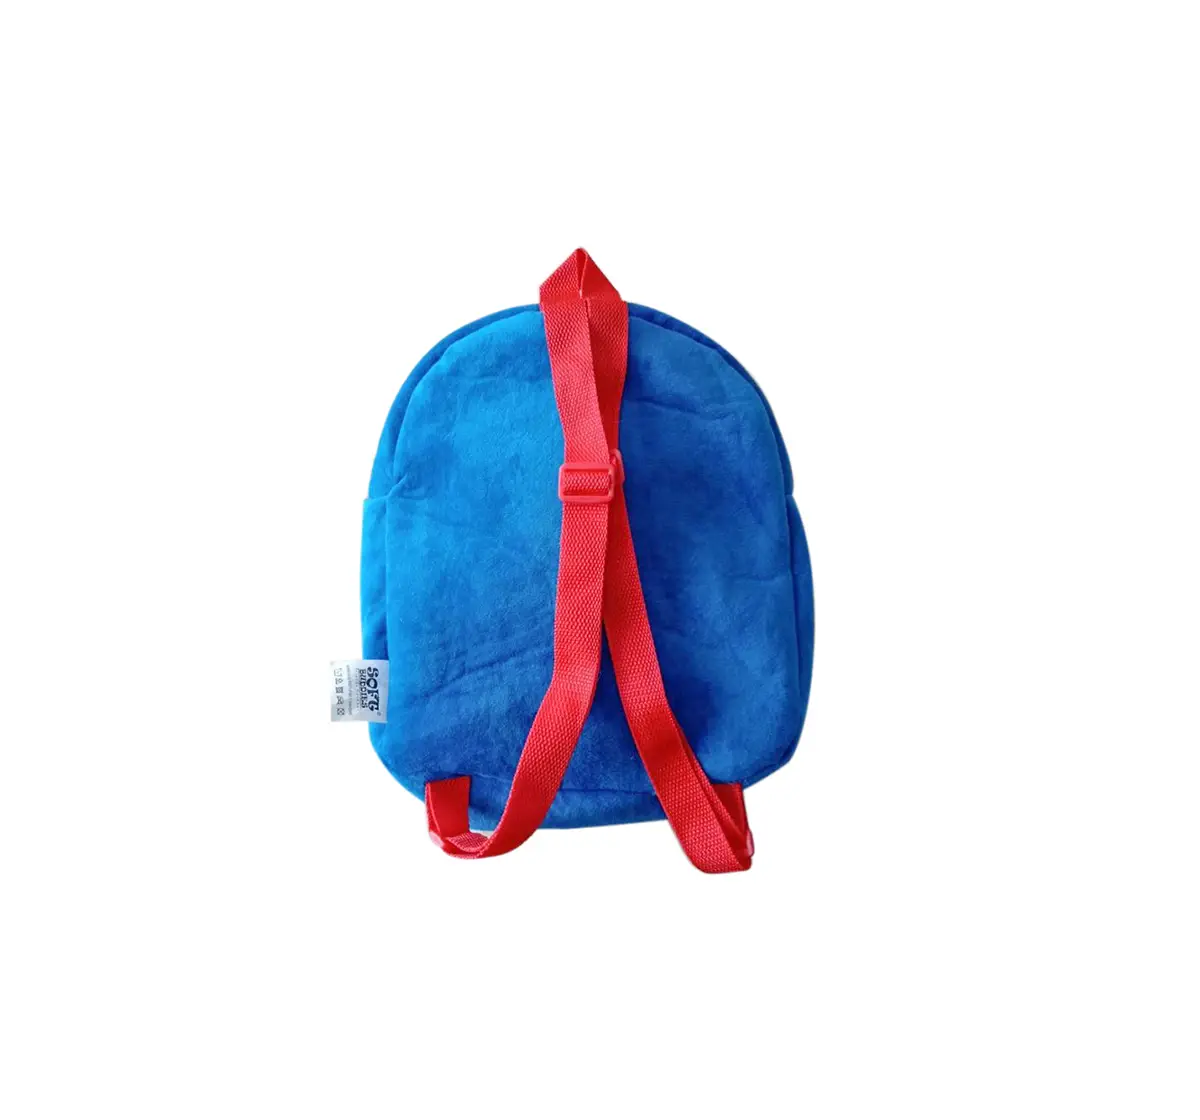 Marvel Captain America Toy On Bag Plush Accessories for Kids age 3Y+ - 25 Cm (Blue)